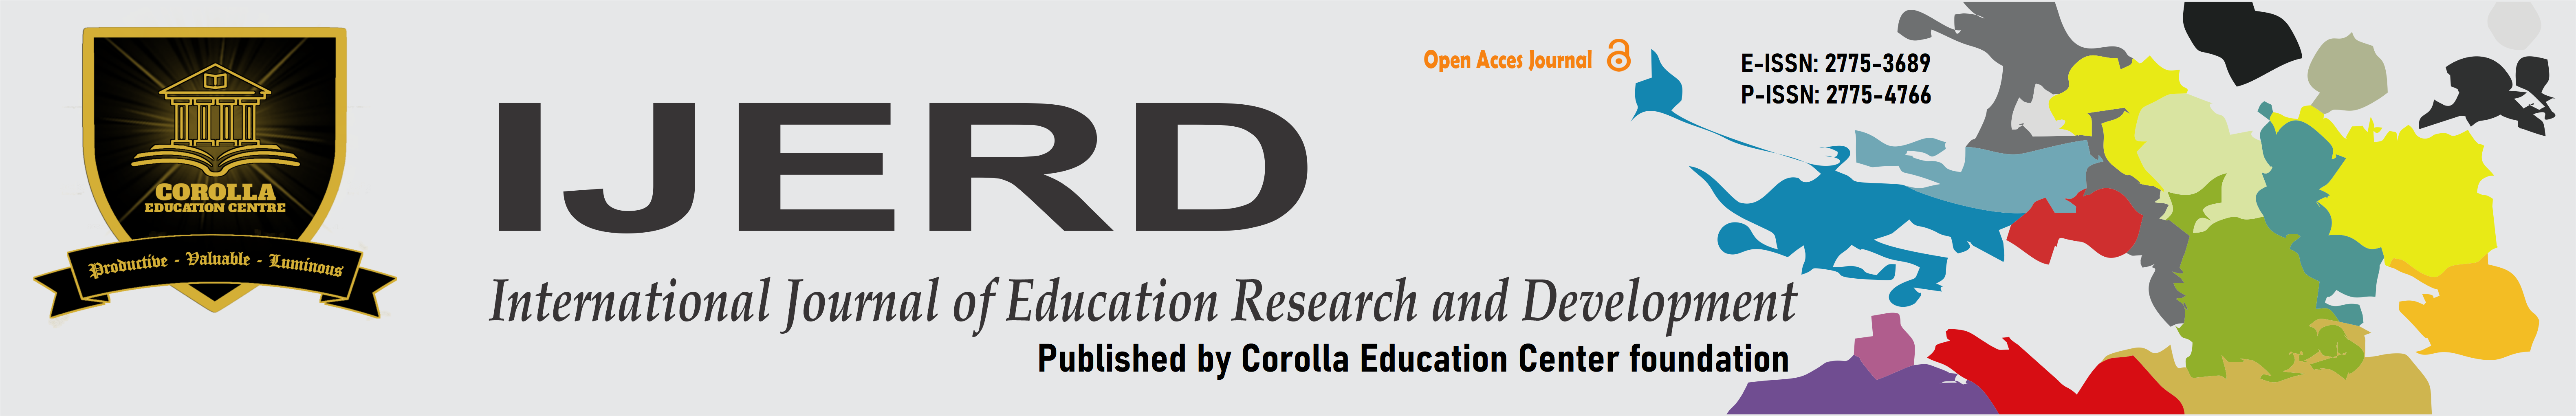 International Journal of Education Research and Development